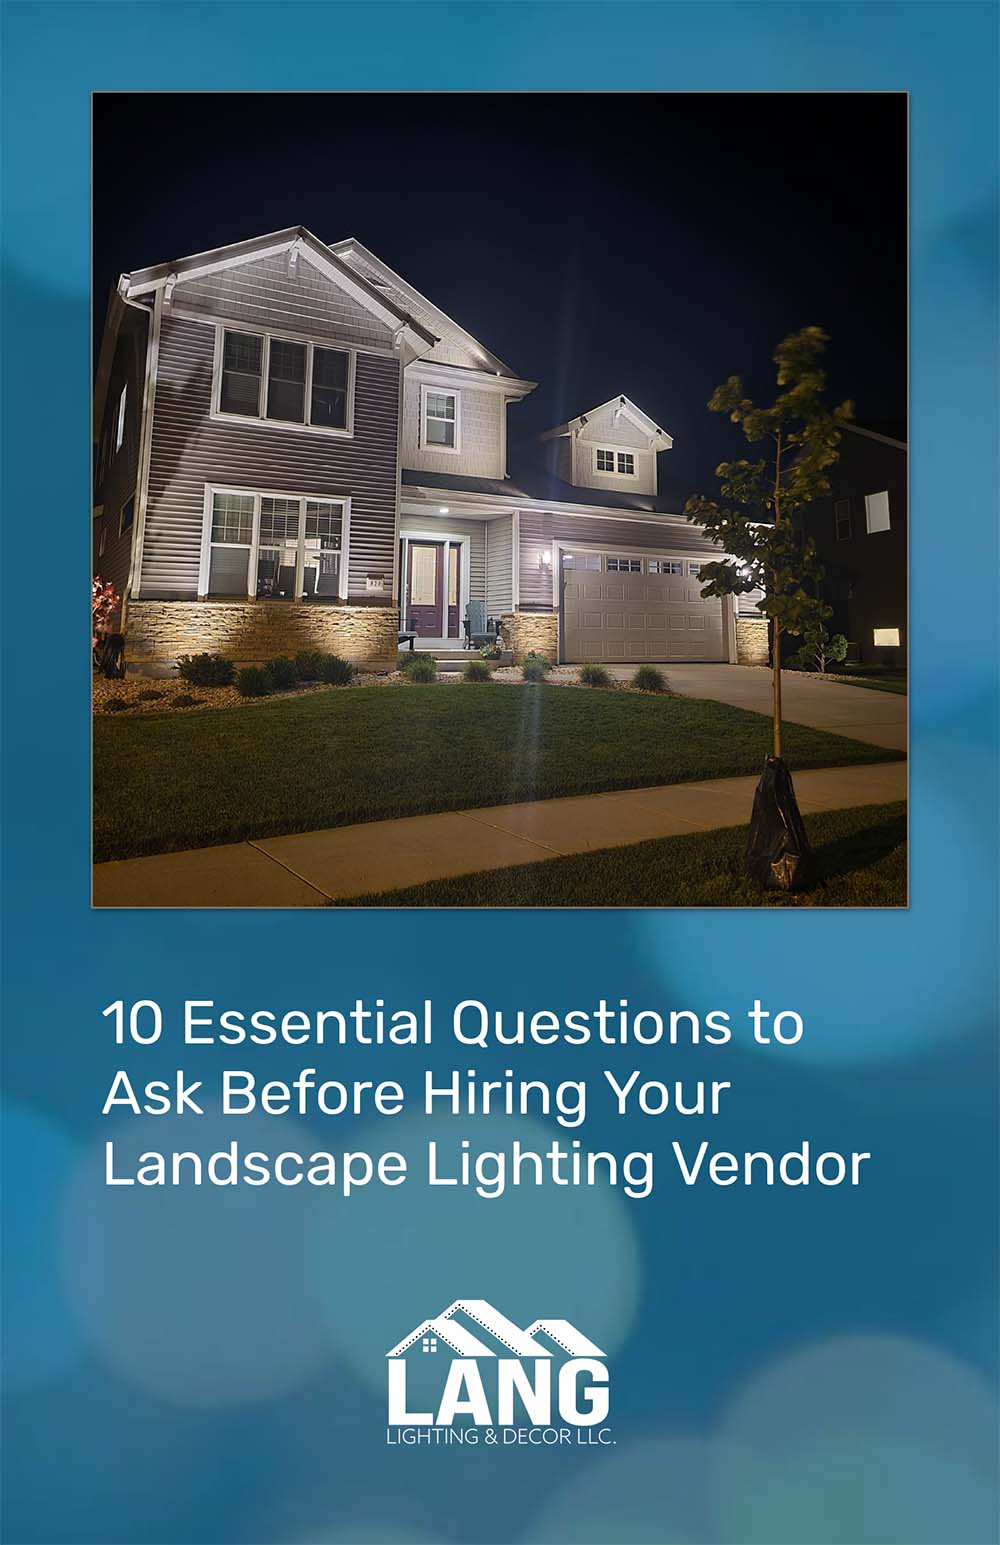 10 Essential Questions to Ask Before Hiring Your Landscape Lighting Vendor